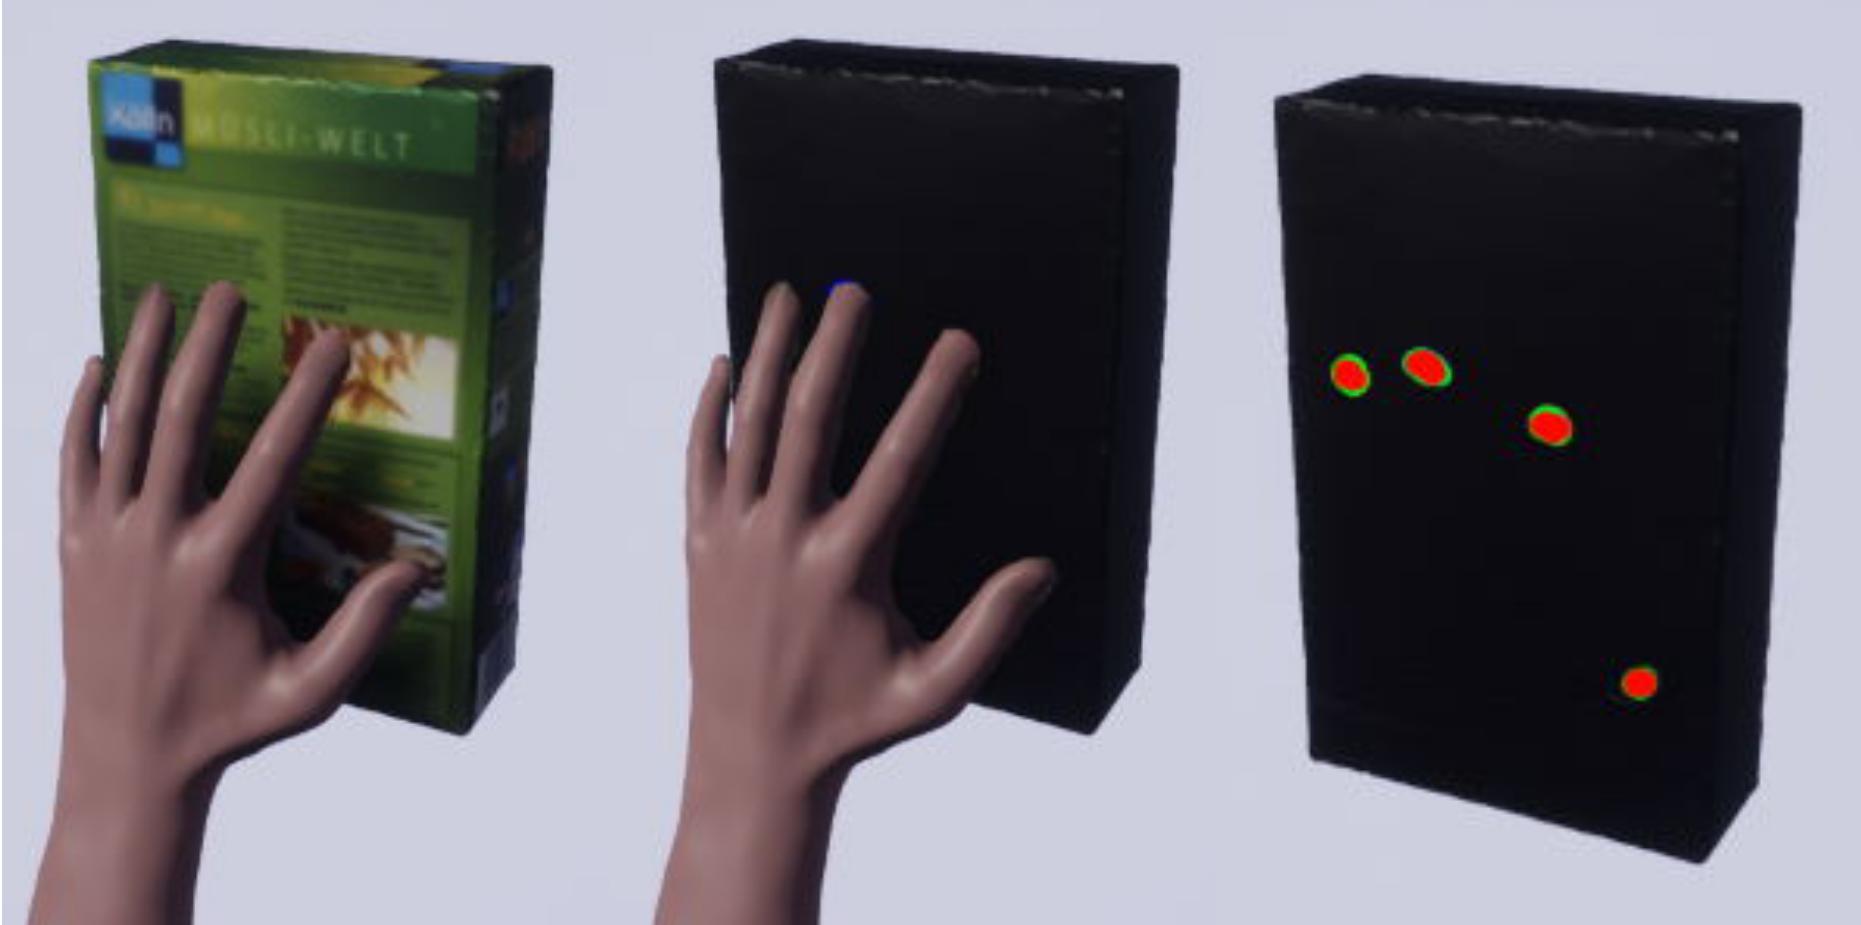 The Forcemap is a completely new idea and shows how strong the object was touched
									during the grasp. A red colour indicates a strong grasp while green indicates a lighter grasp.